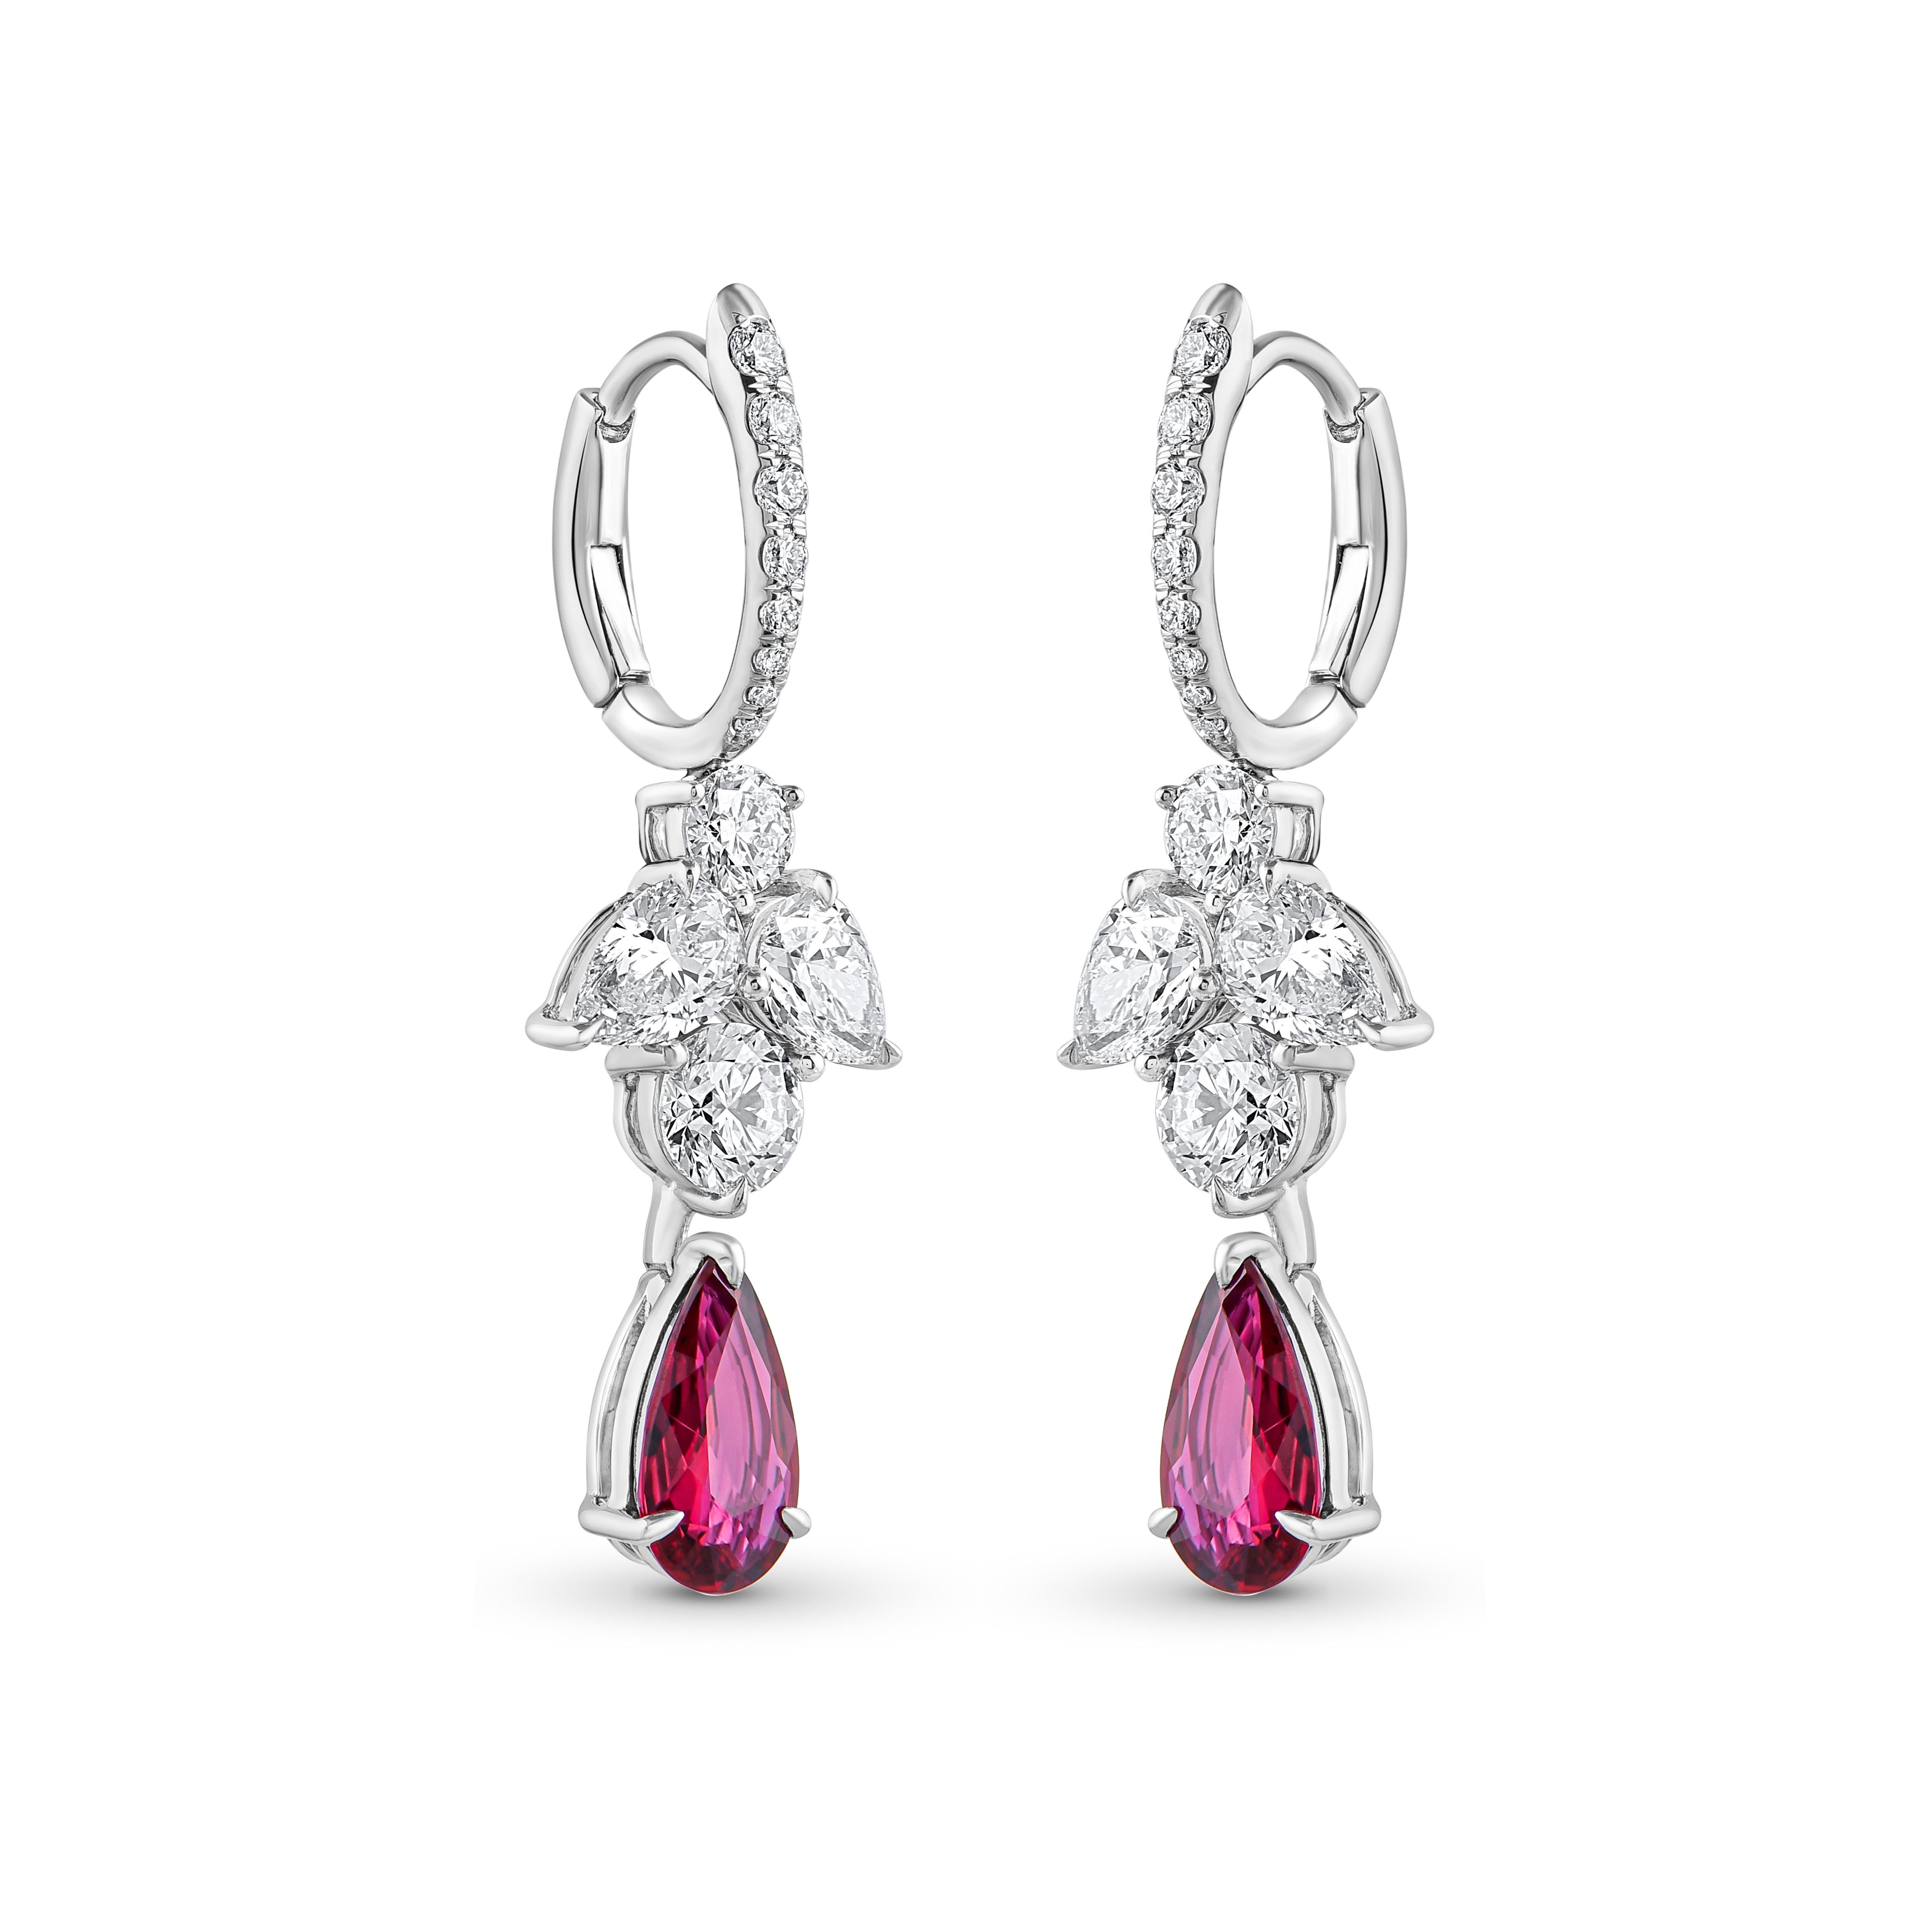 Inspired by the JOY of experiencing a gushing waterfall, these exquisite and elegant dangling earrings from the Cascade Collection are studded with 4 pear-cut diamond, 20 brilliant cut diamonds and 2 pear-cut ruby dripping delicately.

Beautifully